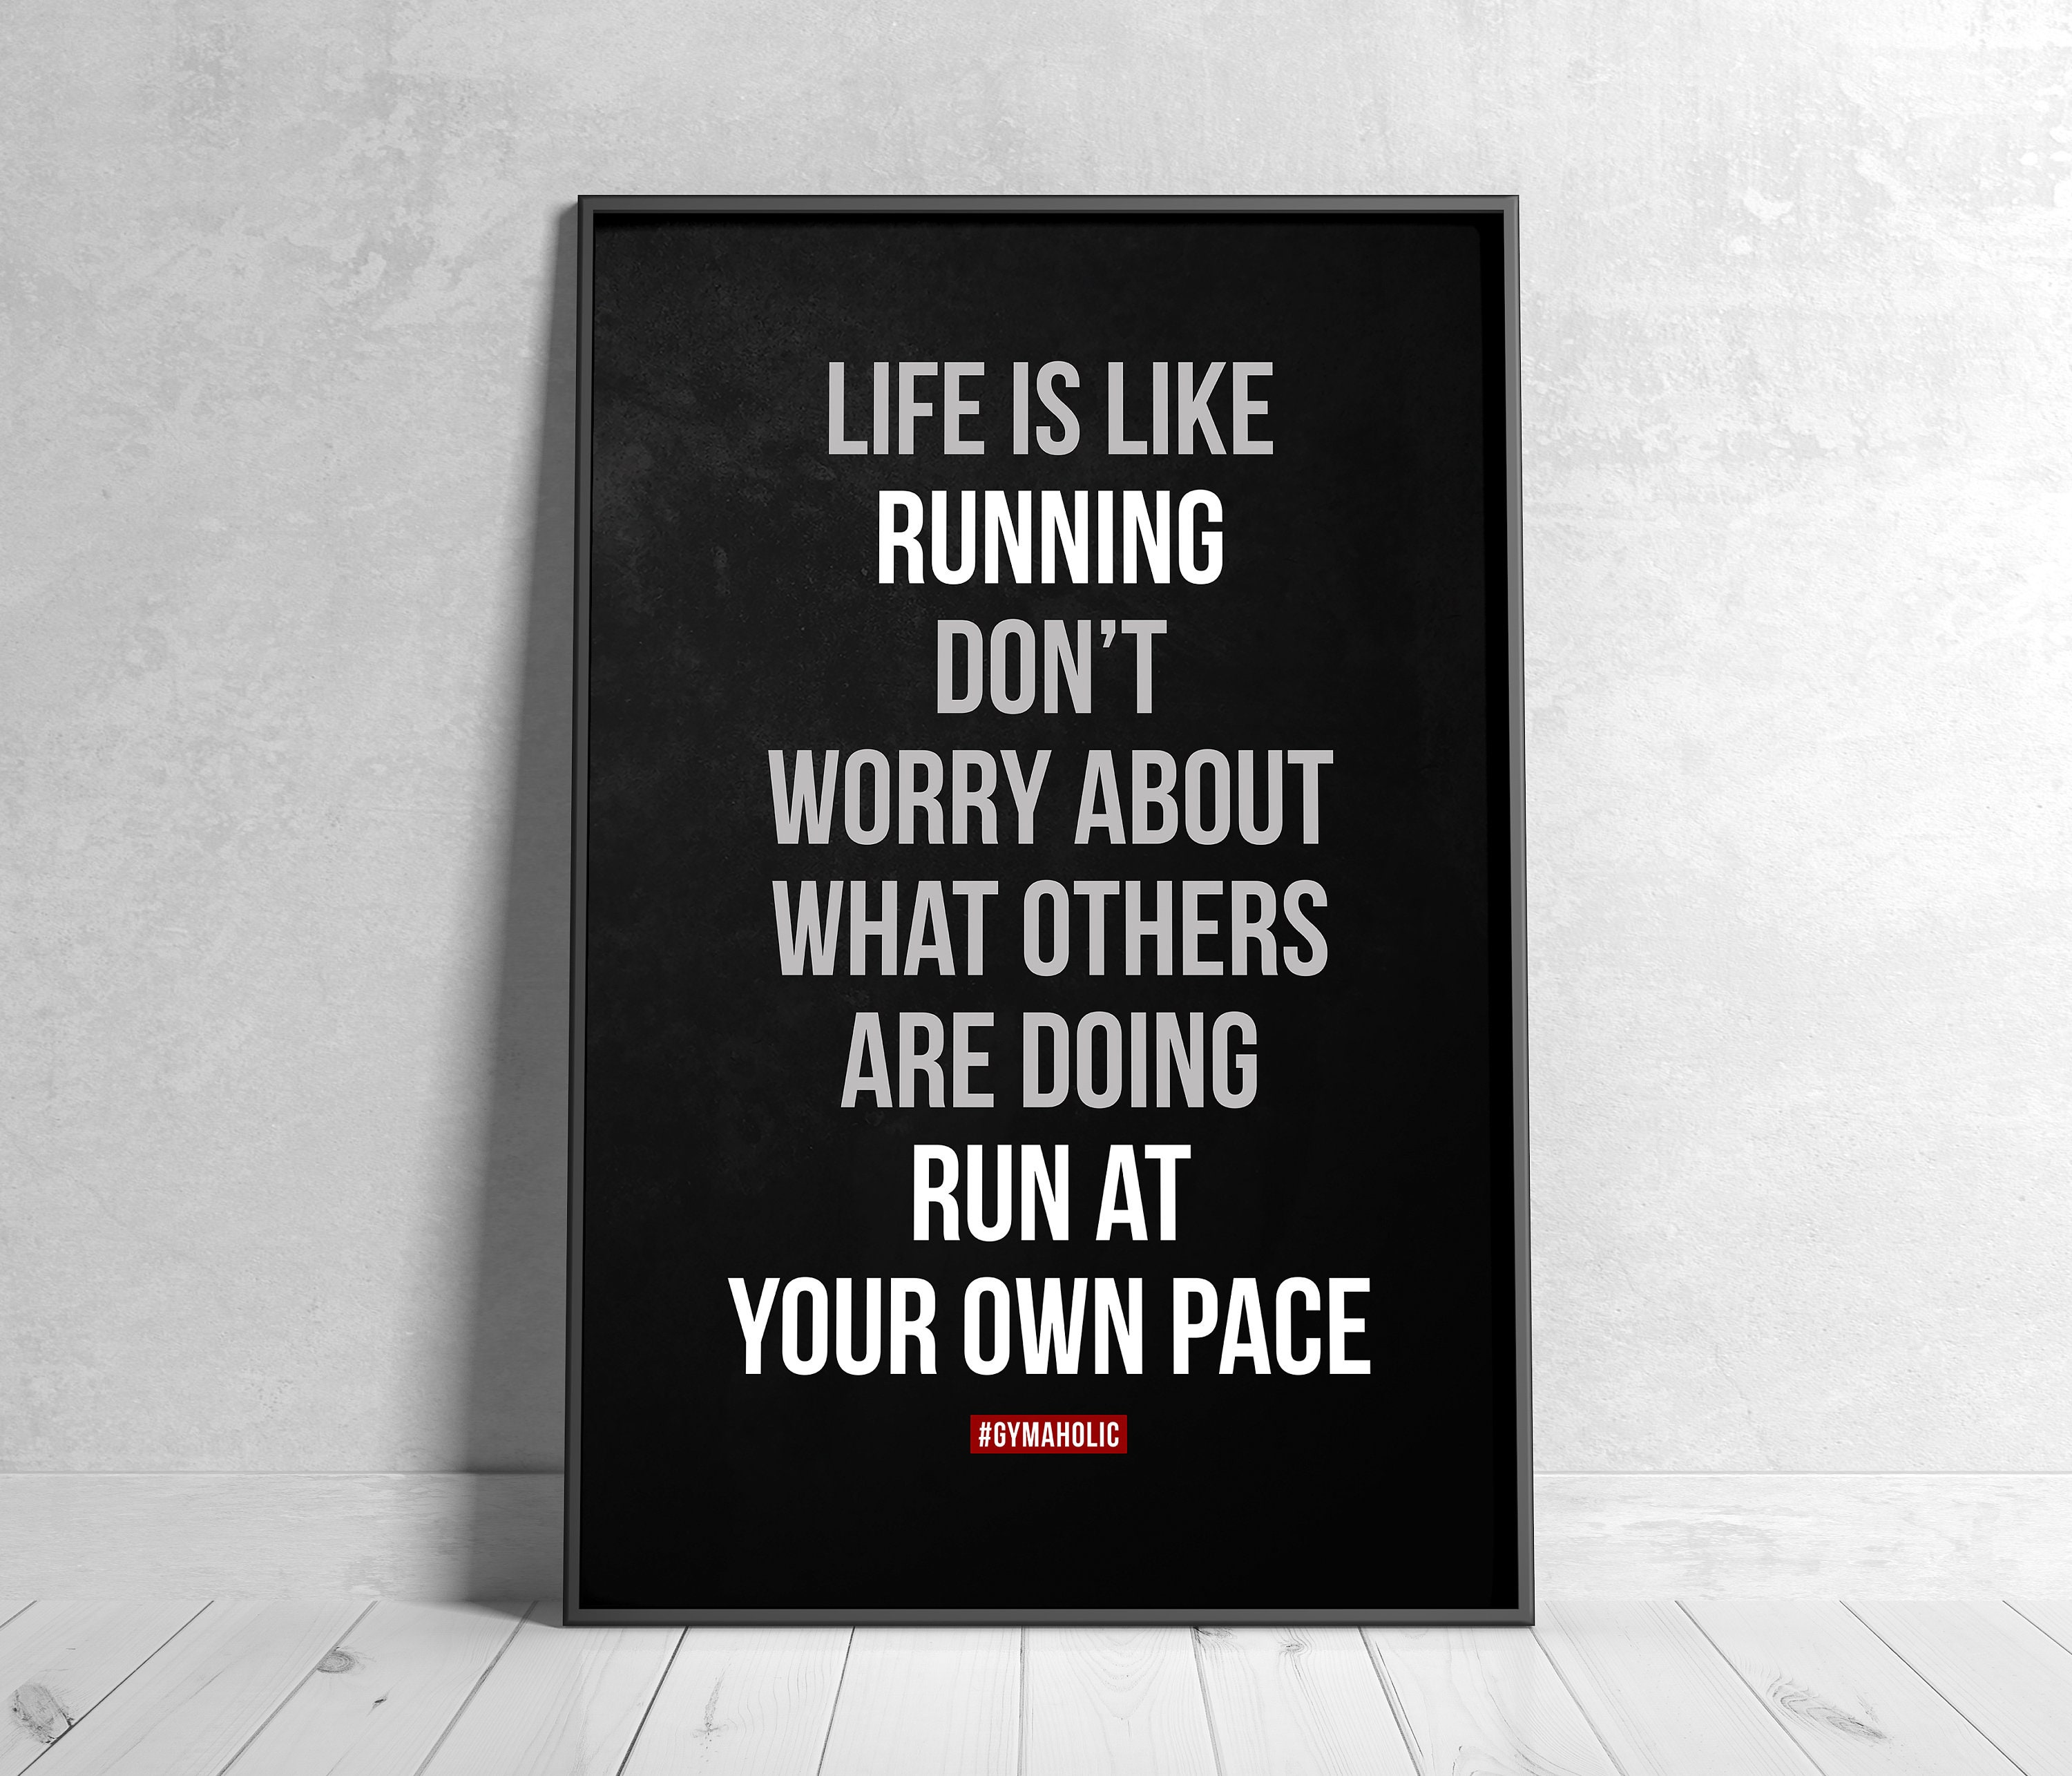 Run at Your Own Pace, Printable Motivational Quote, Home Decor,  Inspirational Wall Art, Gym, Workout, Health, Fitness Poster 